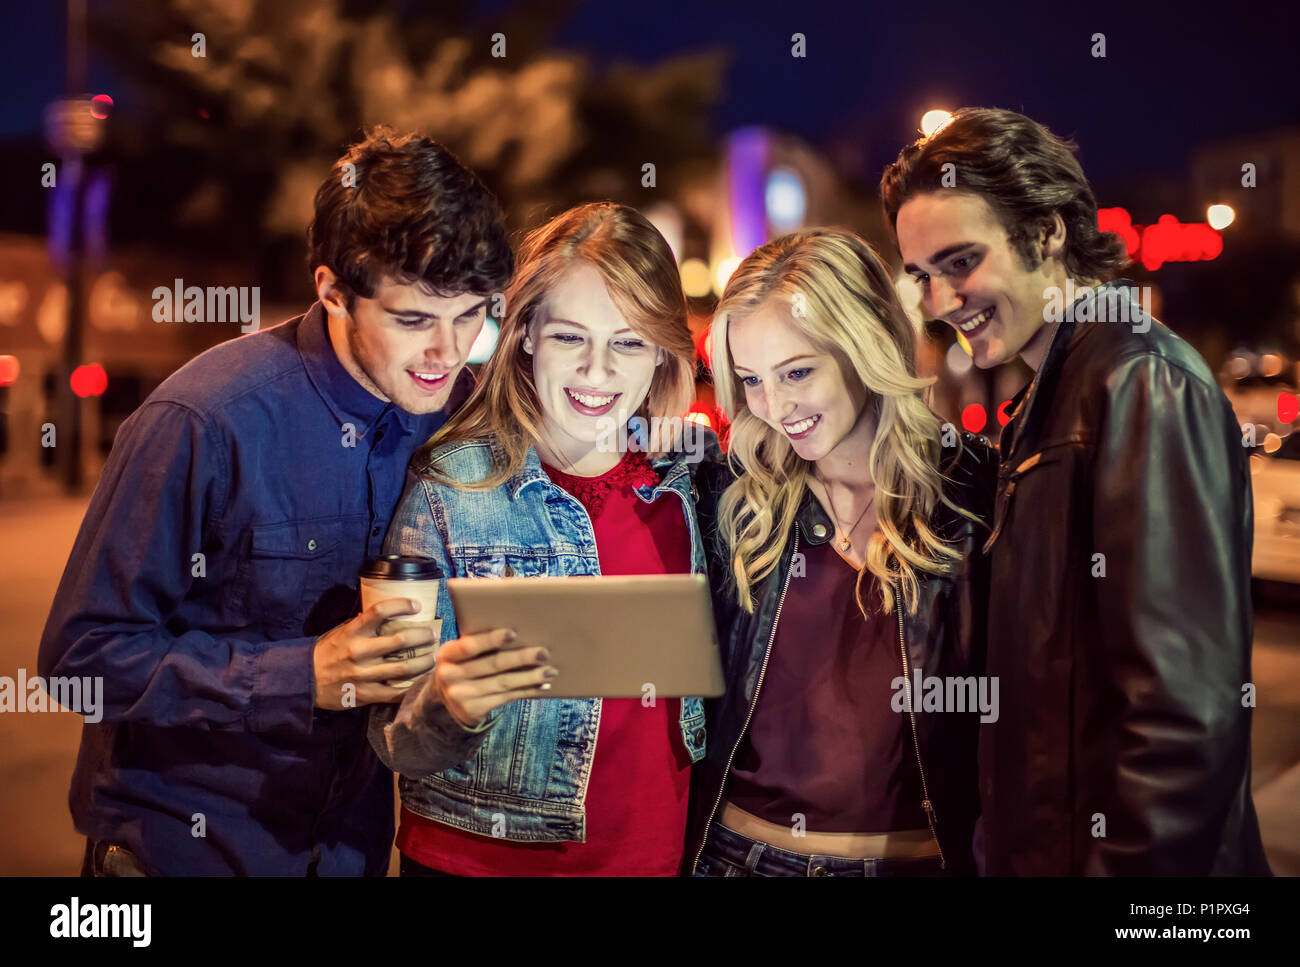 A group of four friends huddle together on a sidewalk looking at a tablet as the glow from the screen lights up their faces; Edmonton, Alberta, Canada Stock Photo